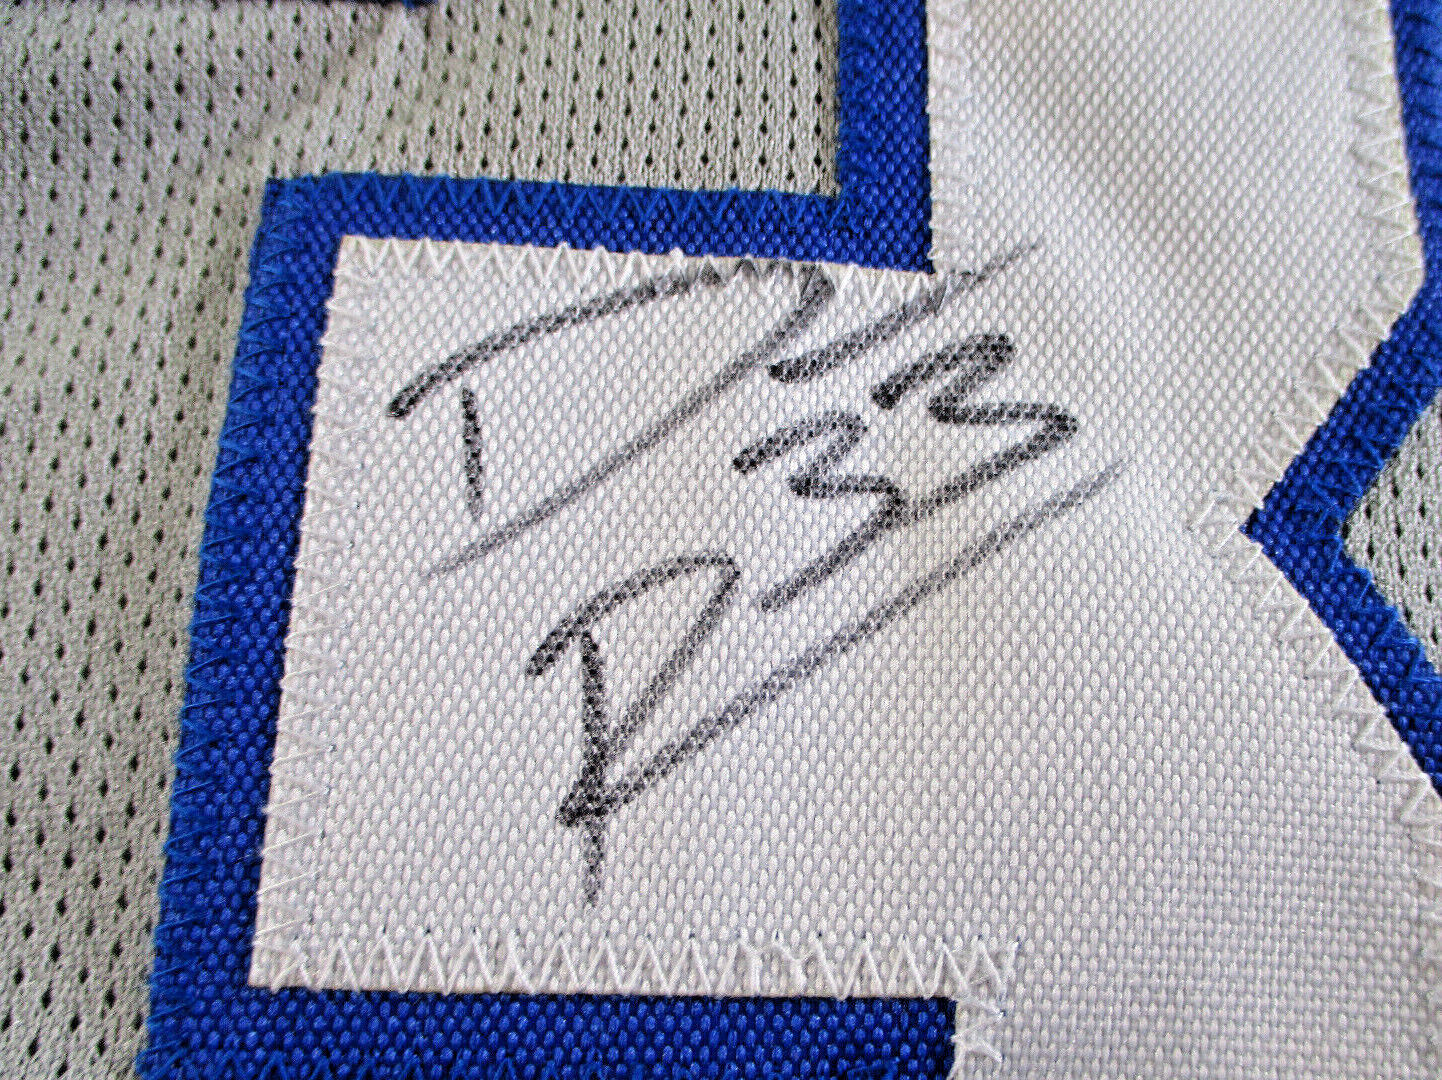 Dominic Rhodes / Autographed Indianapolis Colts Custom Football Jersey / JSA